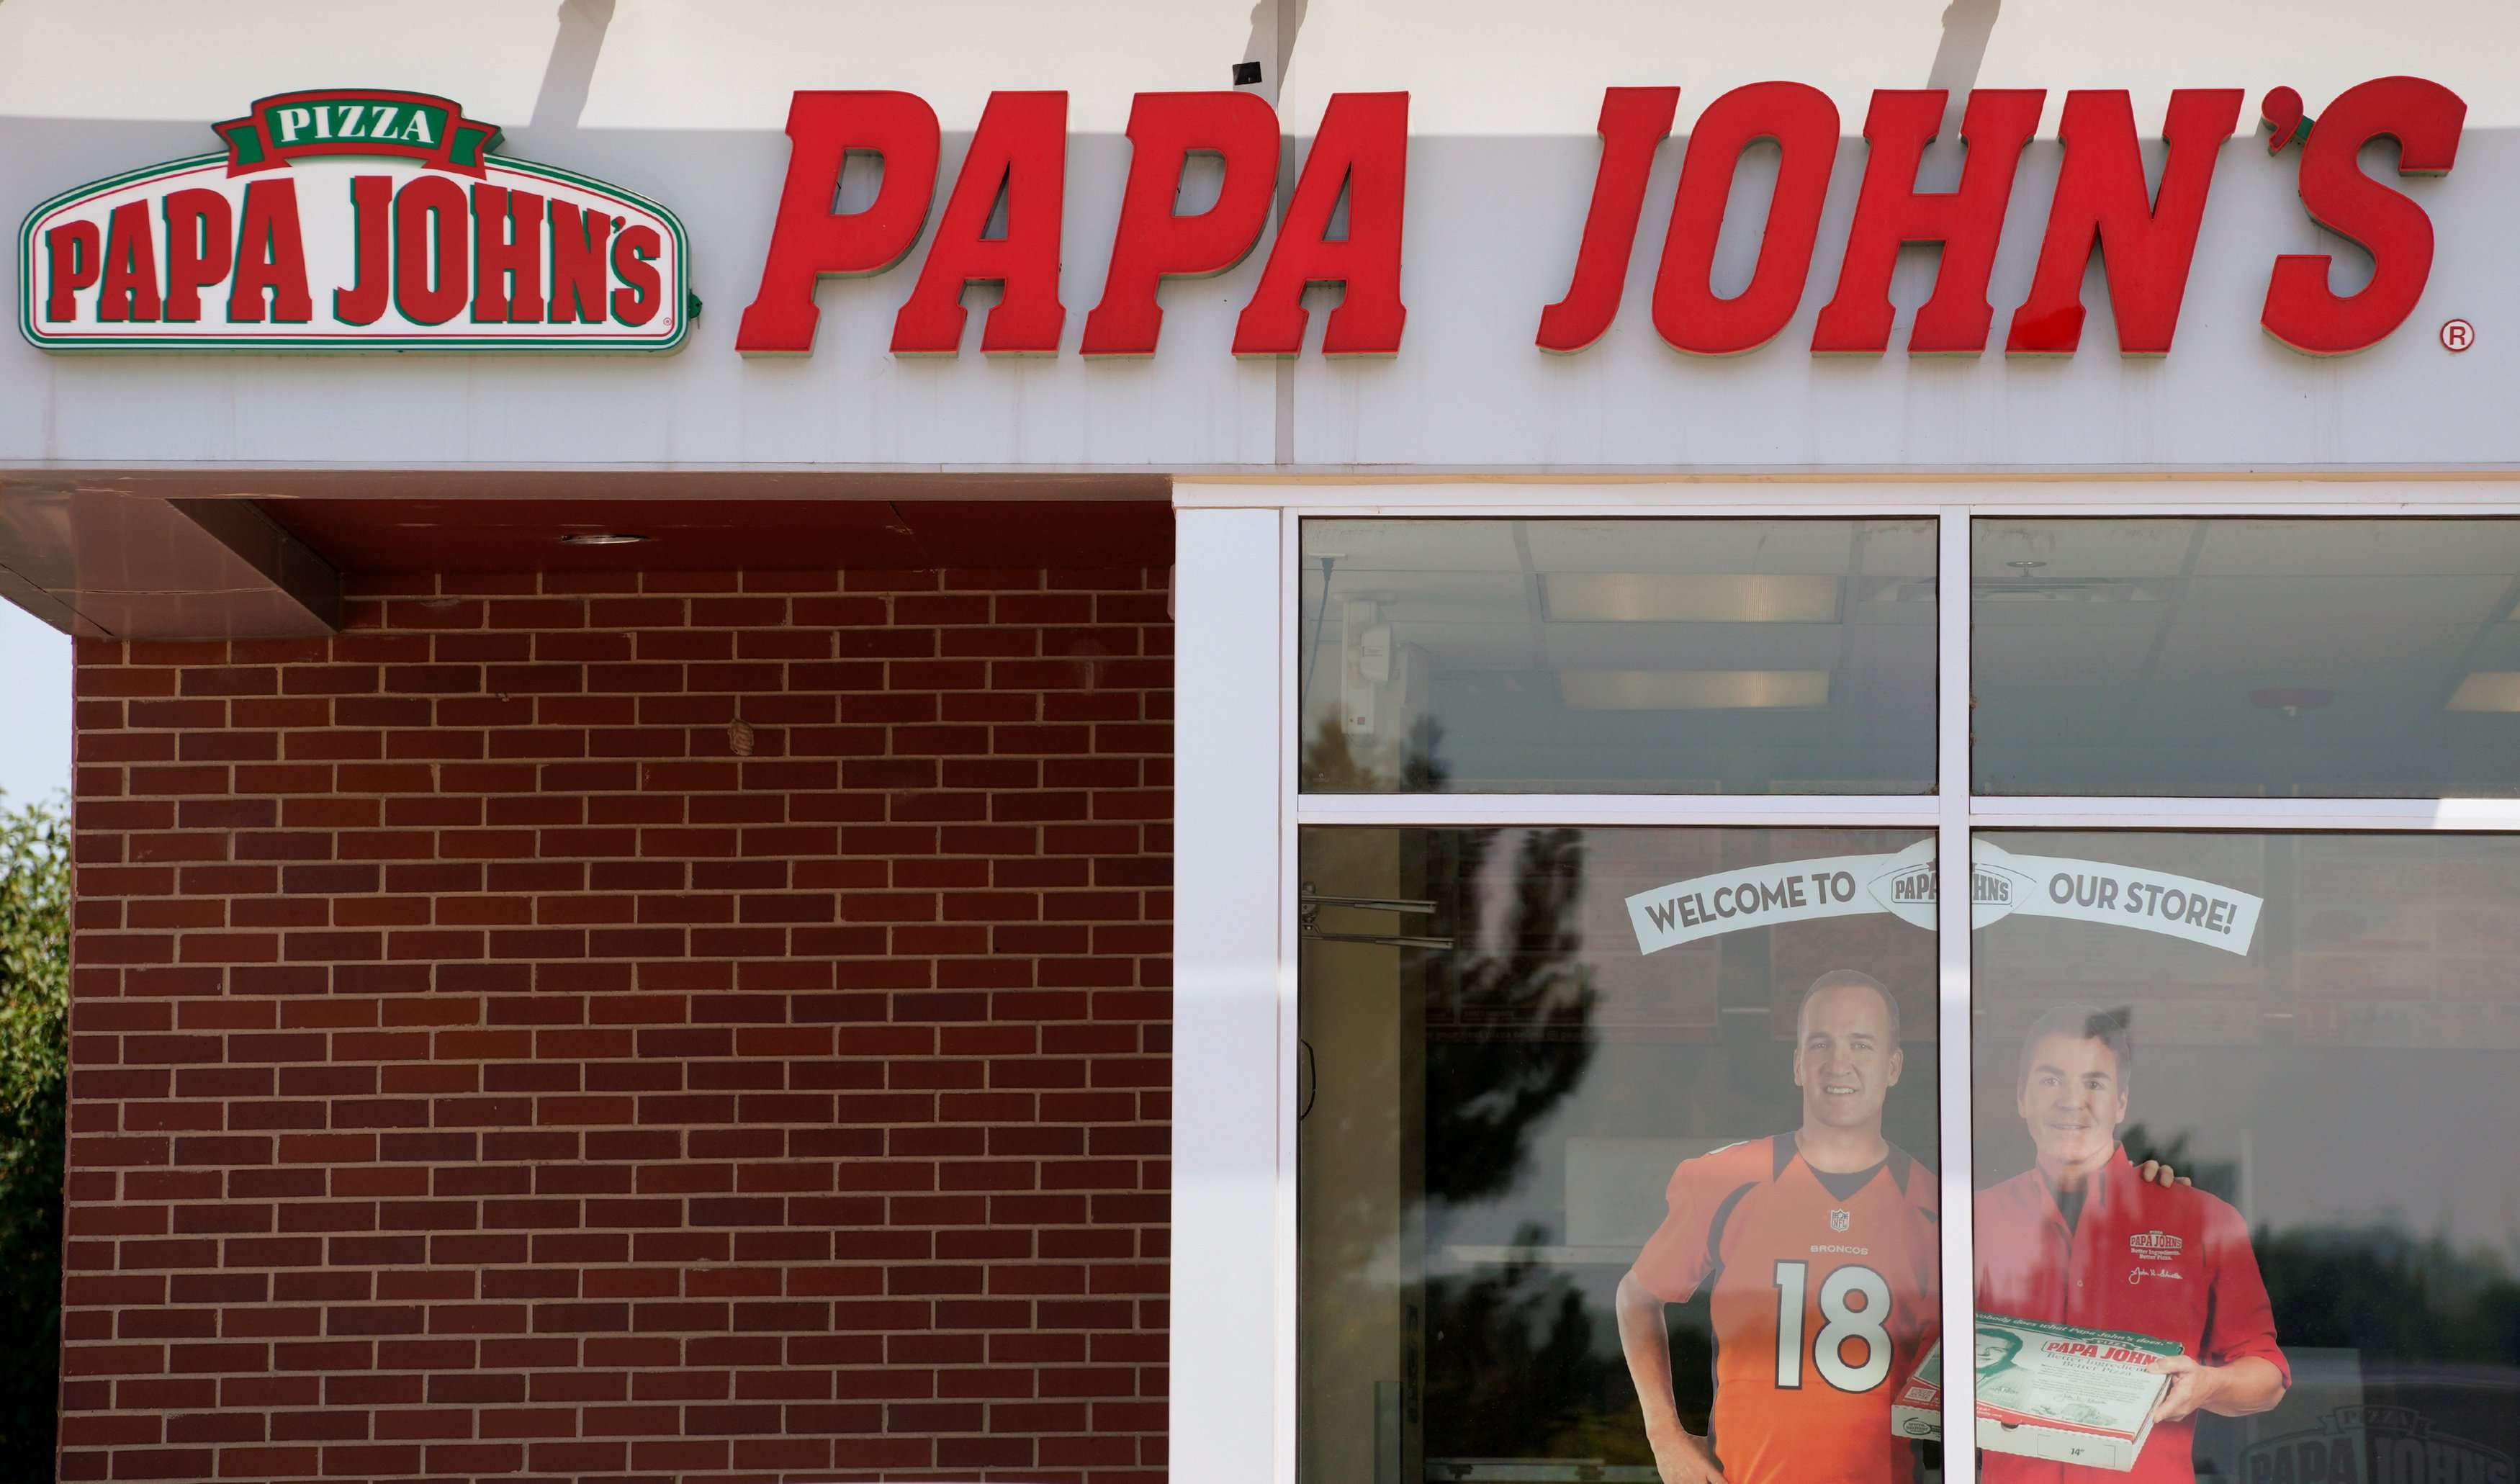 image for Alt-Right White Supremacists Claim Papa John's As Official Pizza